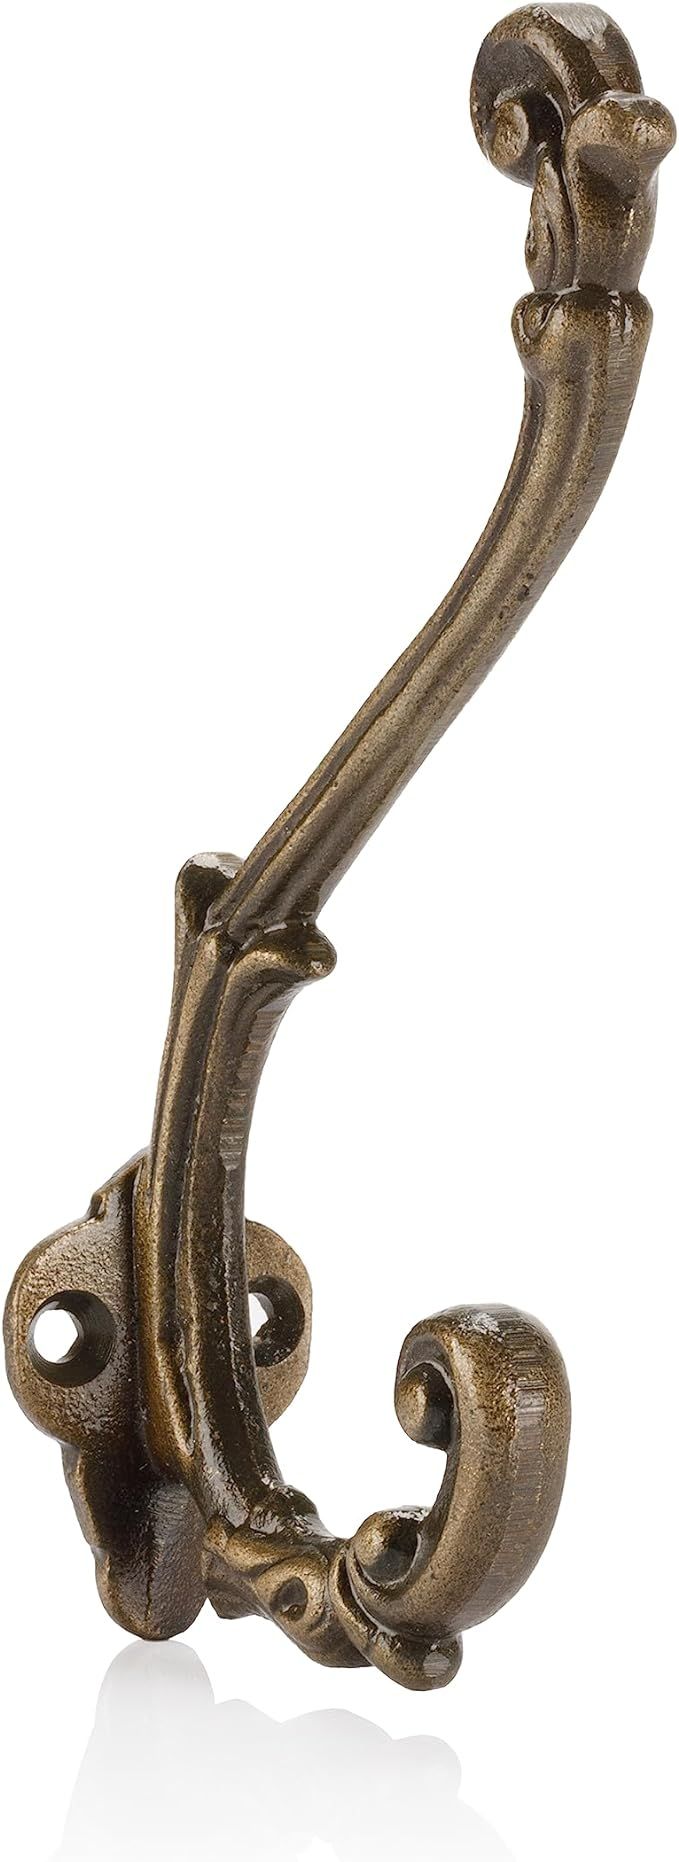 Vintage Cast Iron Wall Hooks (Antique Brass Finish, Set of 4) - Rustic, Farmhouse, French Country... | Amazon (US)